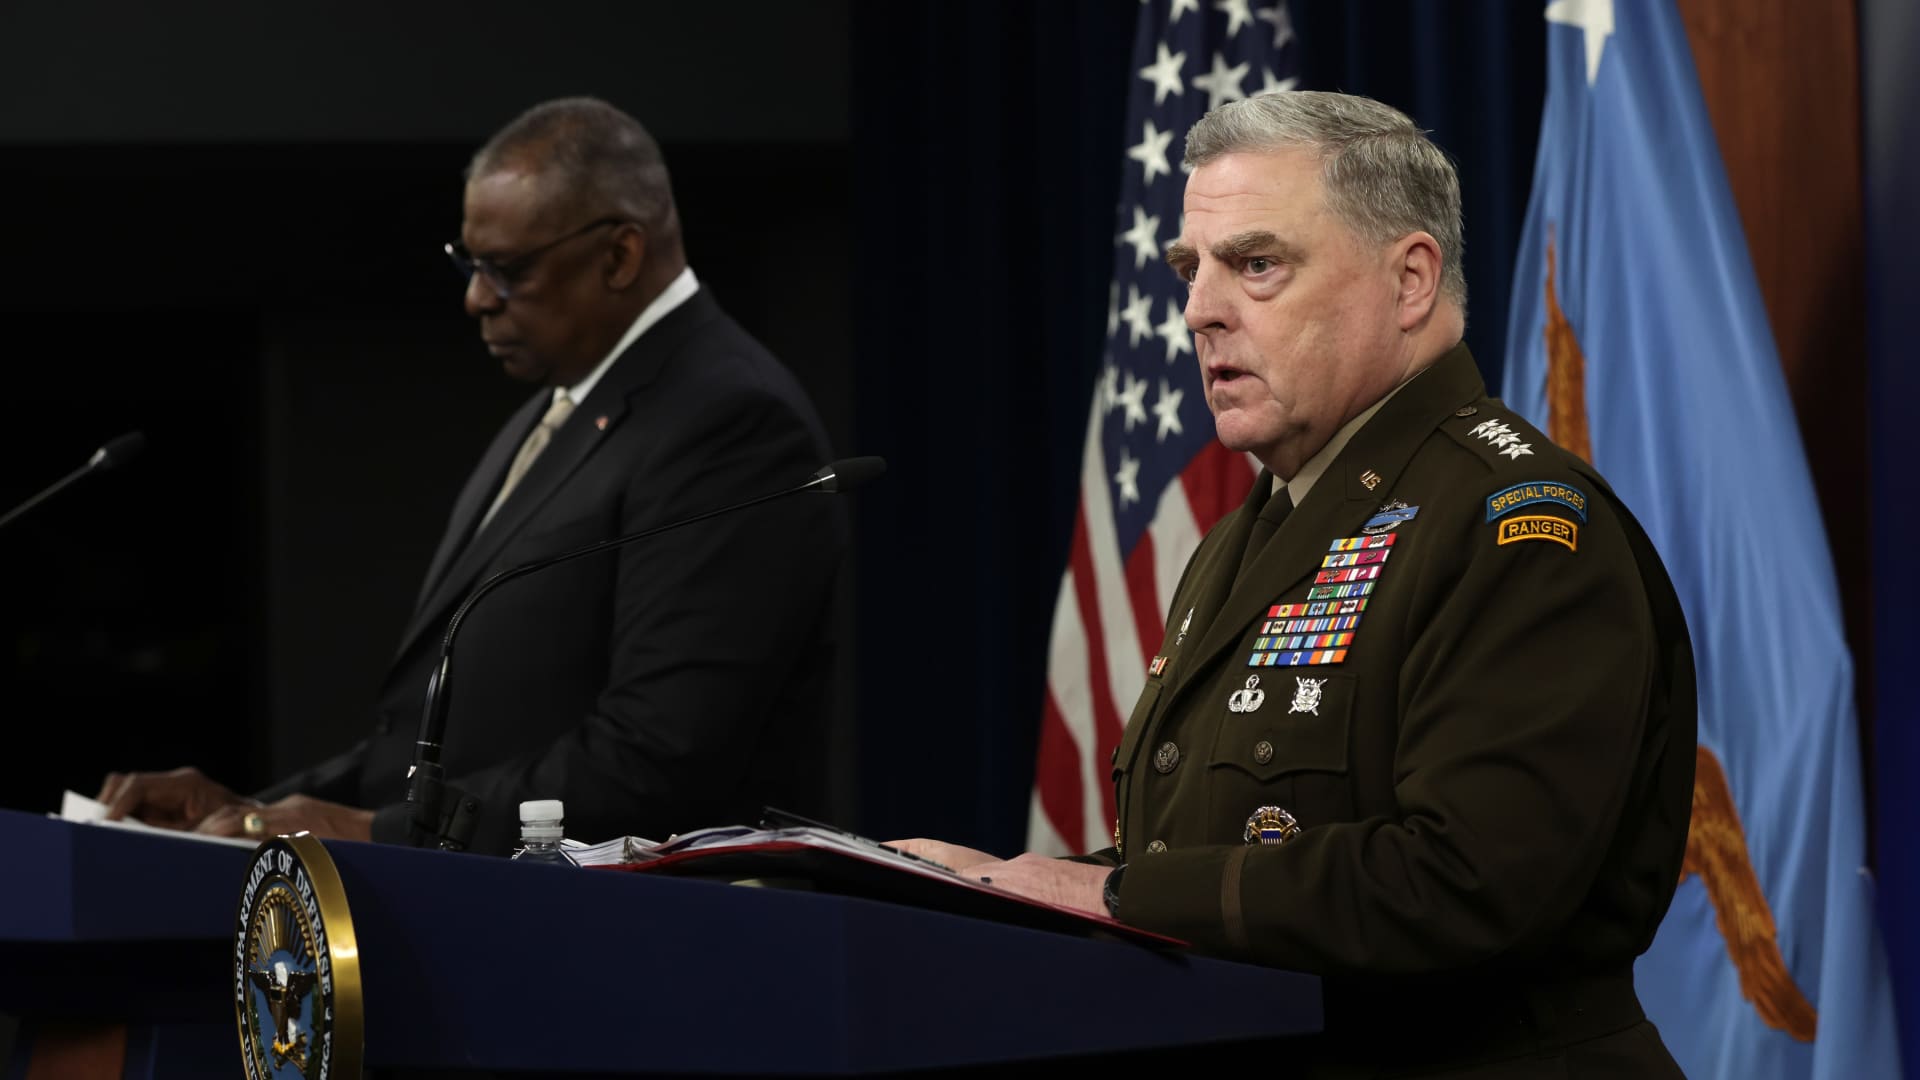 U.S. Secretary of Defense Lloyd Austin (L) and Chairman of the Joint Chiefs of Staff General Mark Milley (R) participate in a news briefing at the Pentagon May 23, 2022 in Arlington, Virginia.